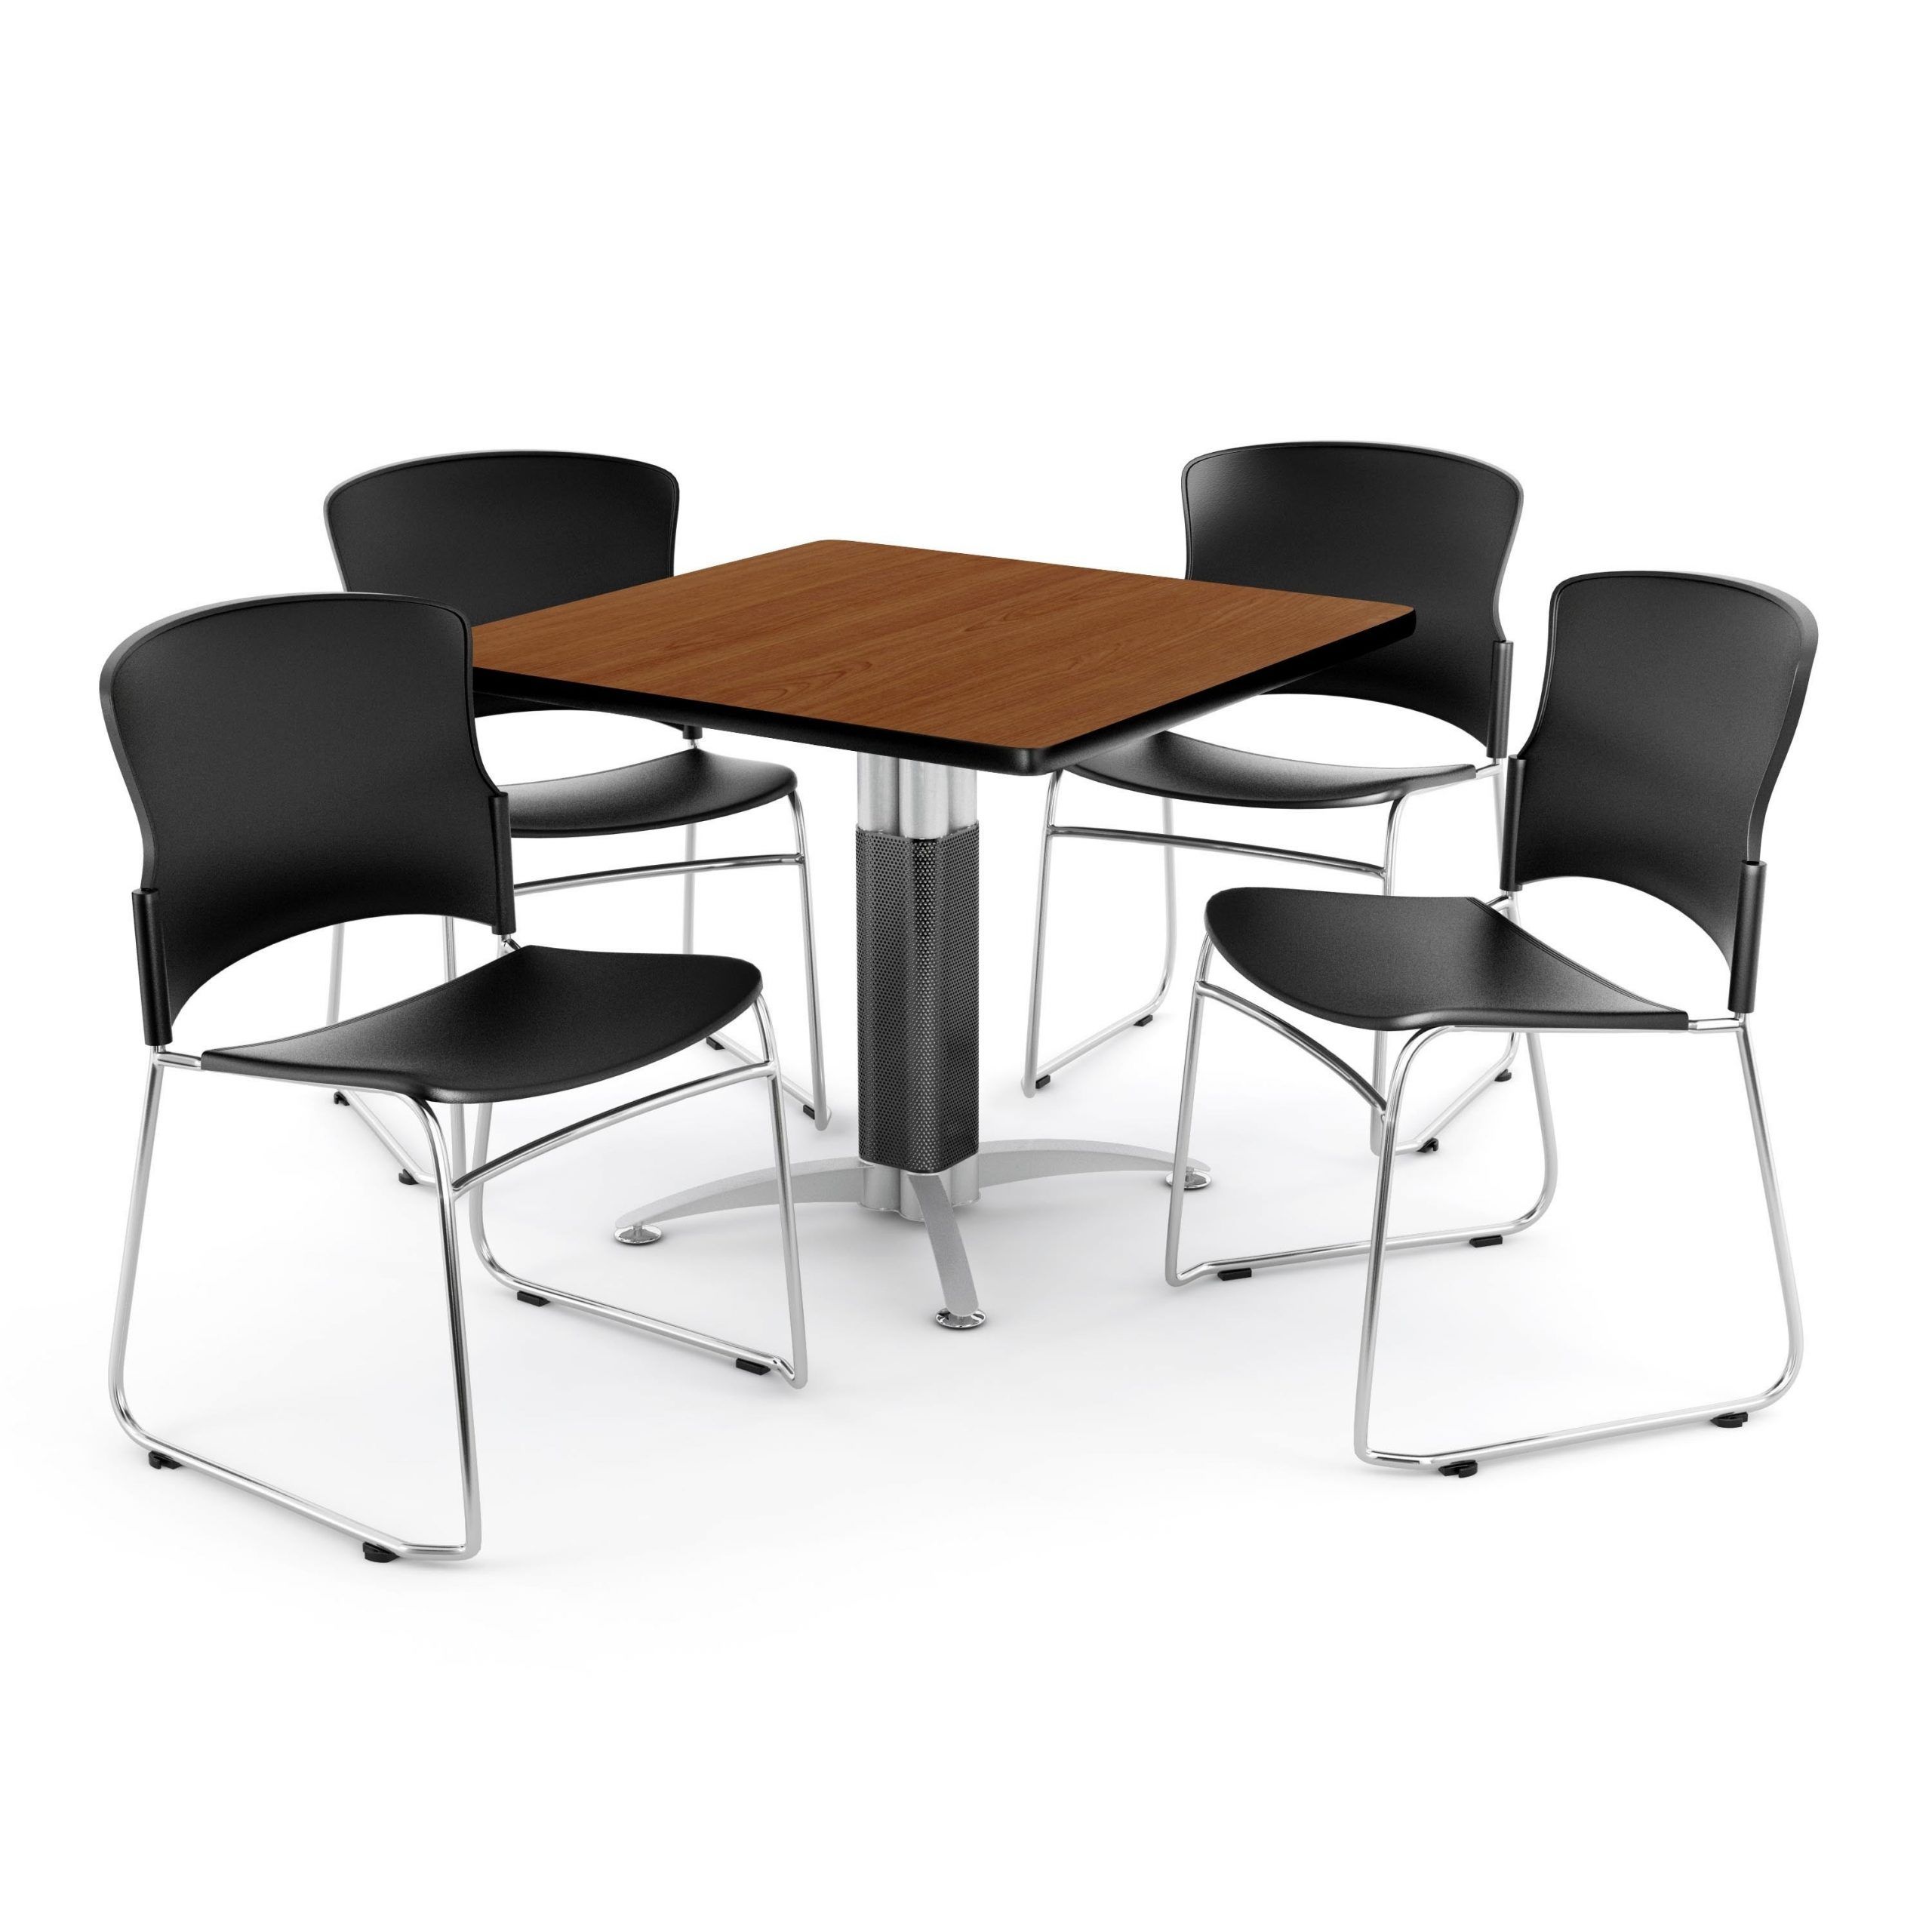 Fashionable Bentham 47" L Round Stone Breakroom Tables Pertaining To Ofm Cherry 36 Inch Square Mesh Base Table With 4 Plastic (View 8 of 20)